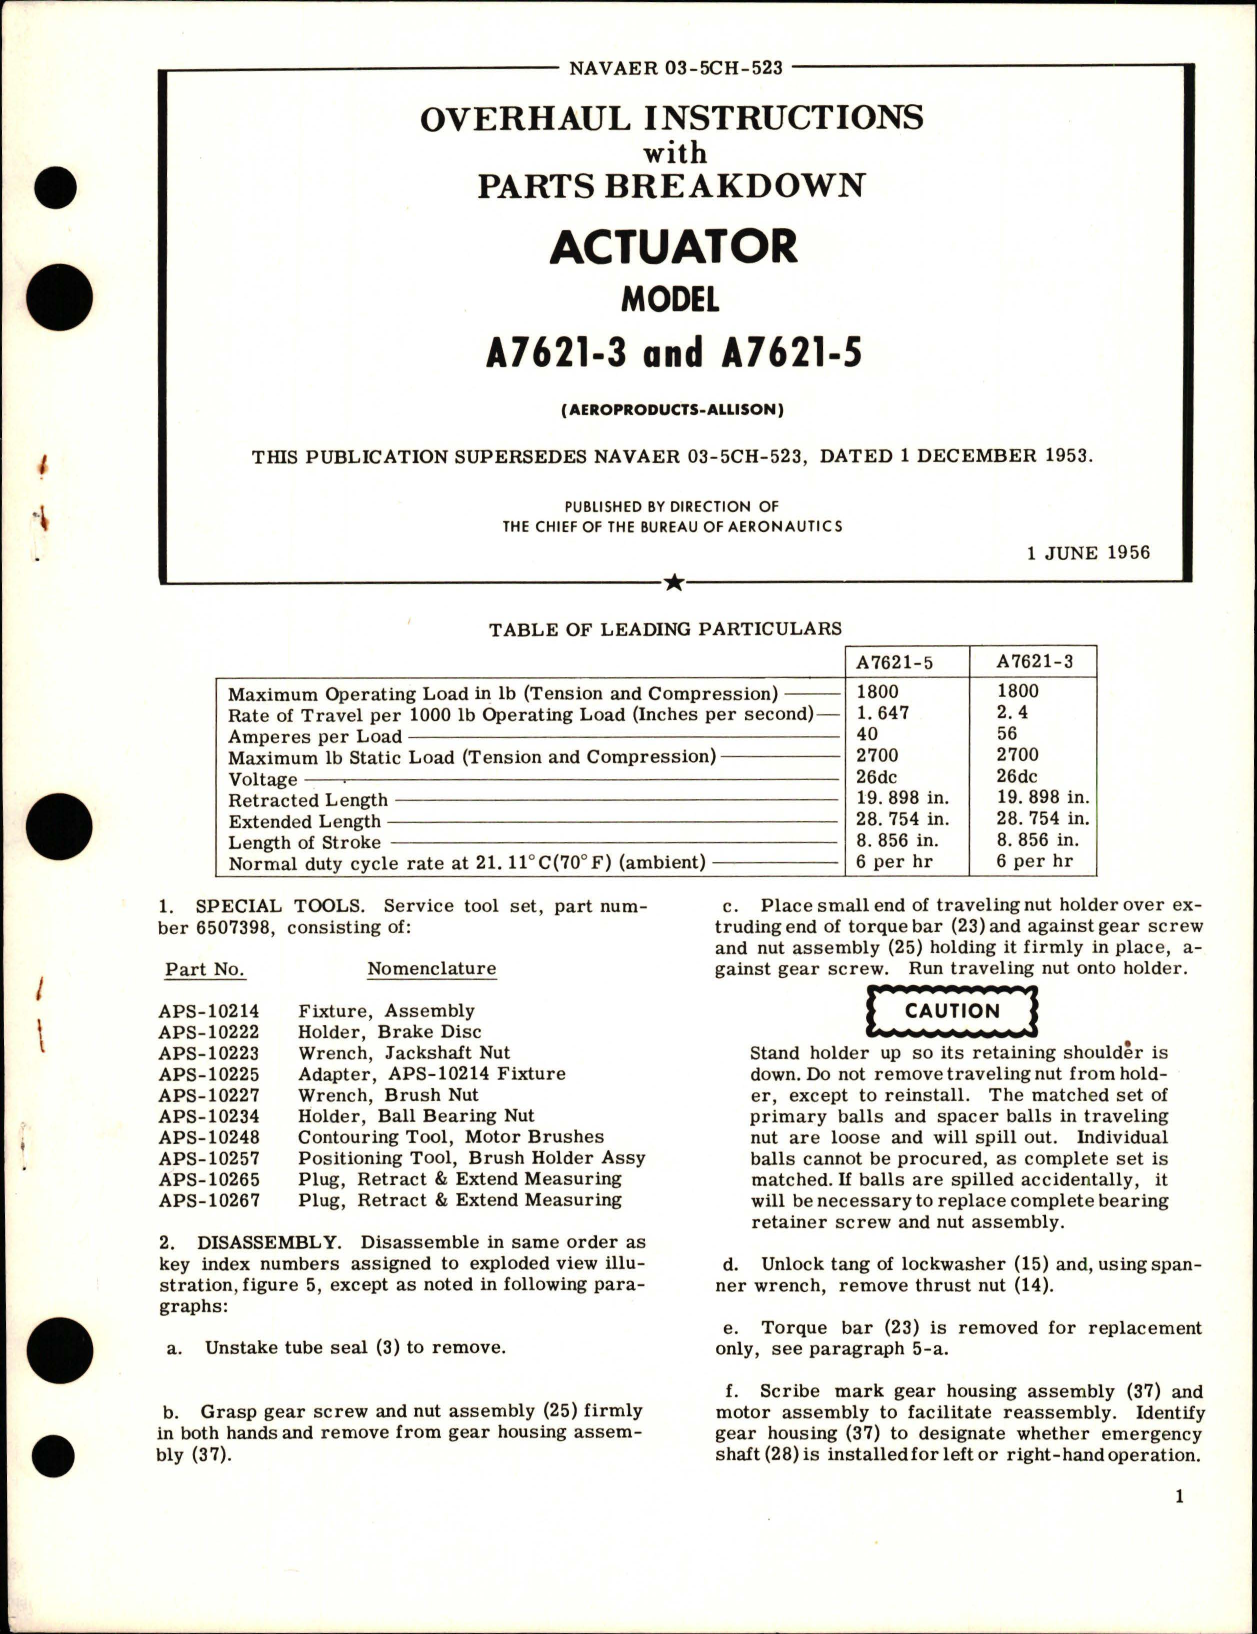 Sample page 1 from AirCorps Library document: Overhaul Instructions with Parts Breakdown for Actuator - Model A7621-3 and A7621-5